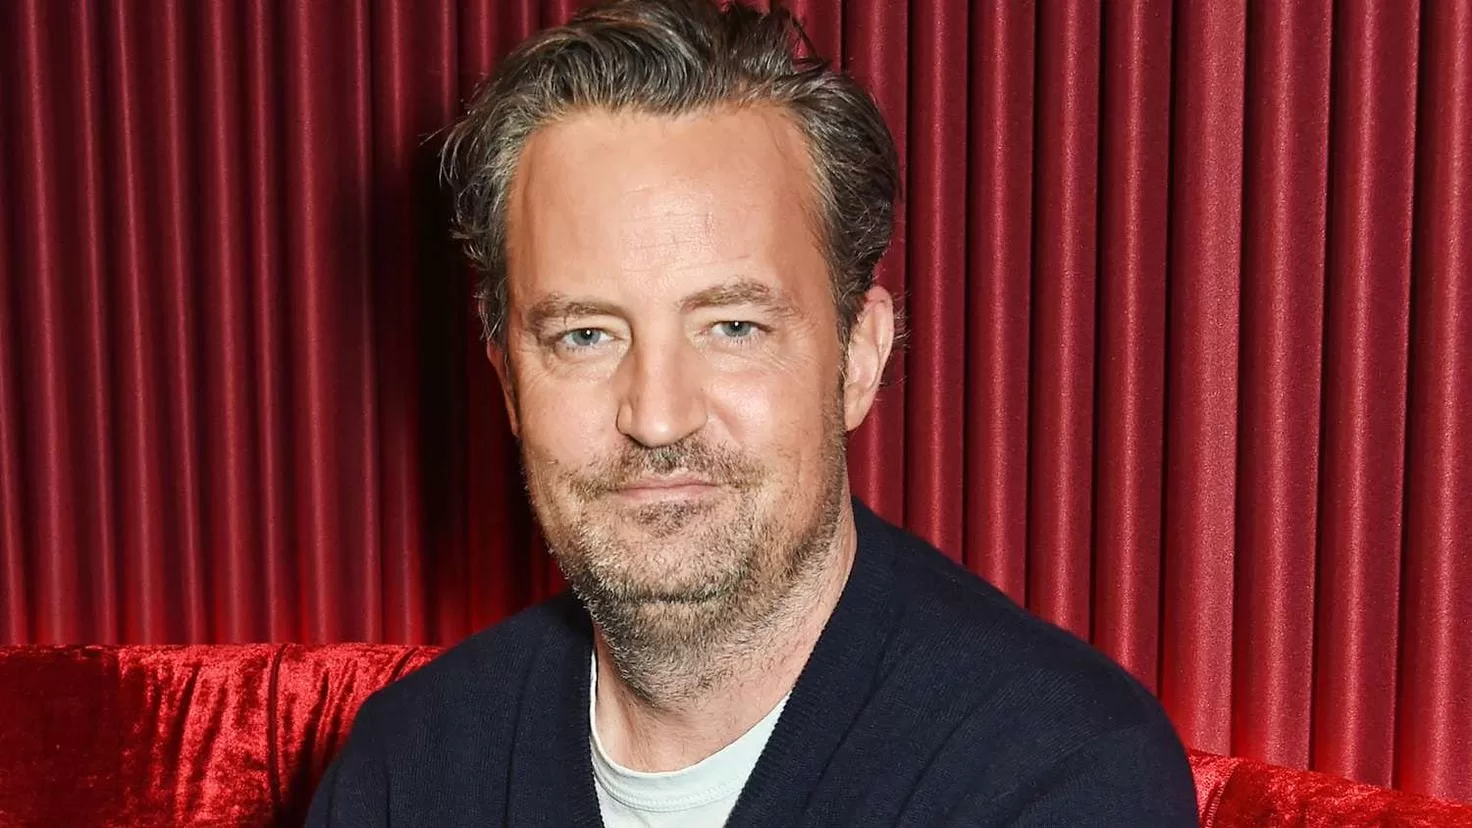 Matthew Perry, accused of assaulting several women
